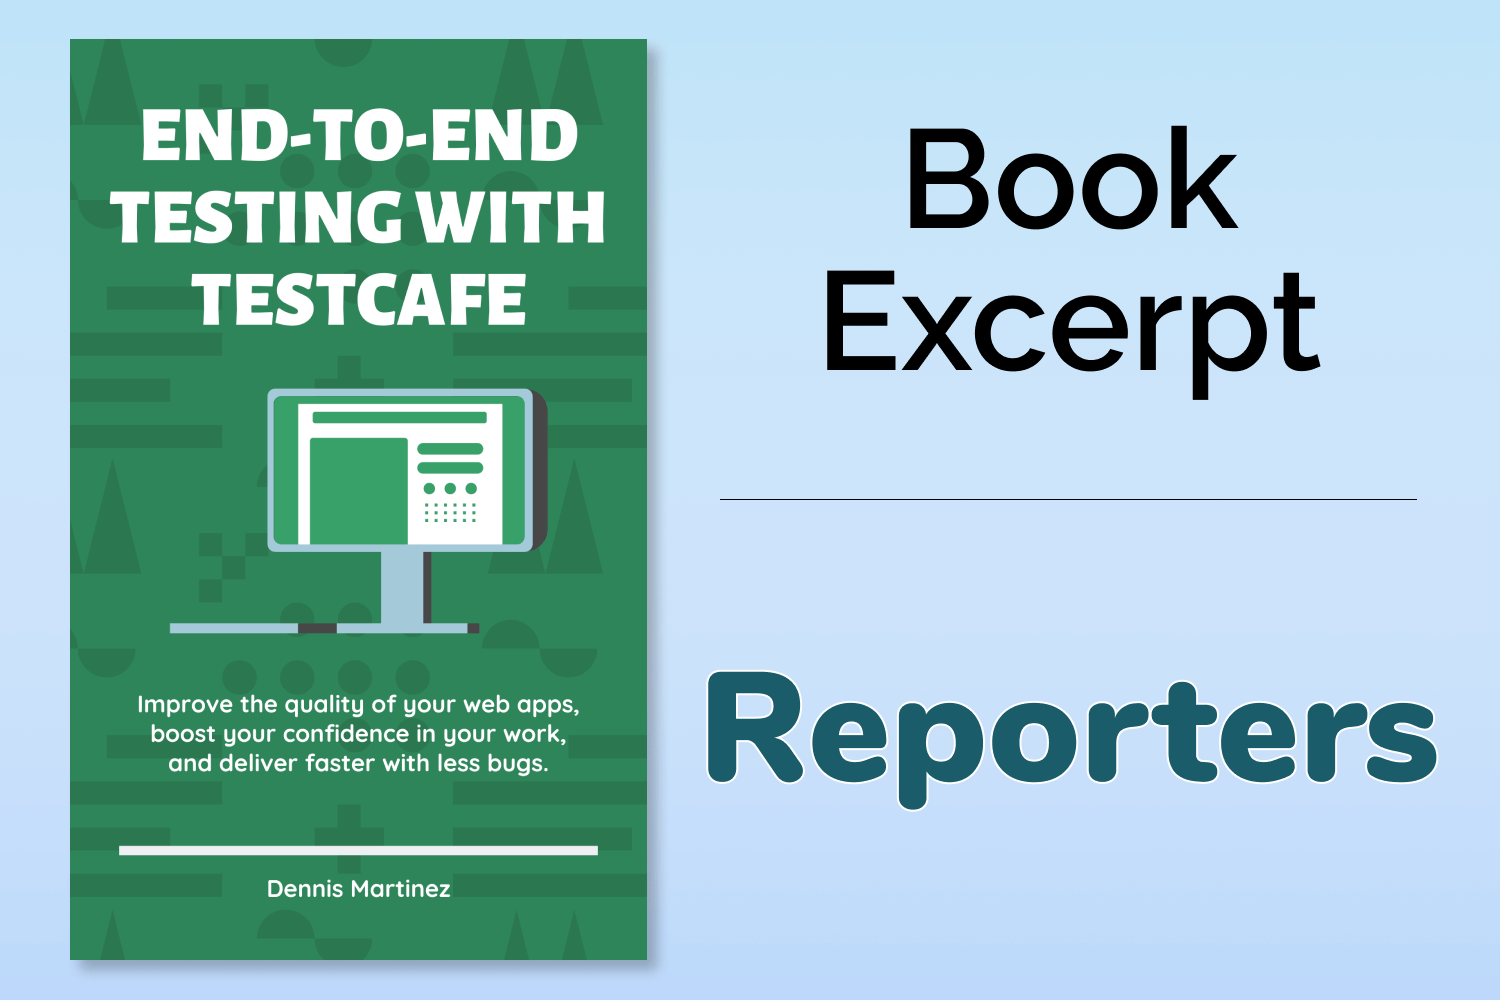 End-to-End Testing with TestCafe Book Excerpt: Reporters